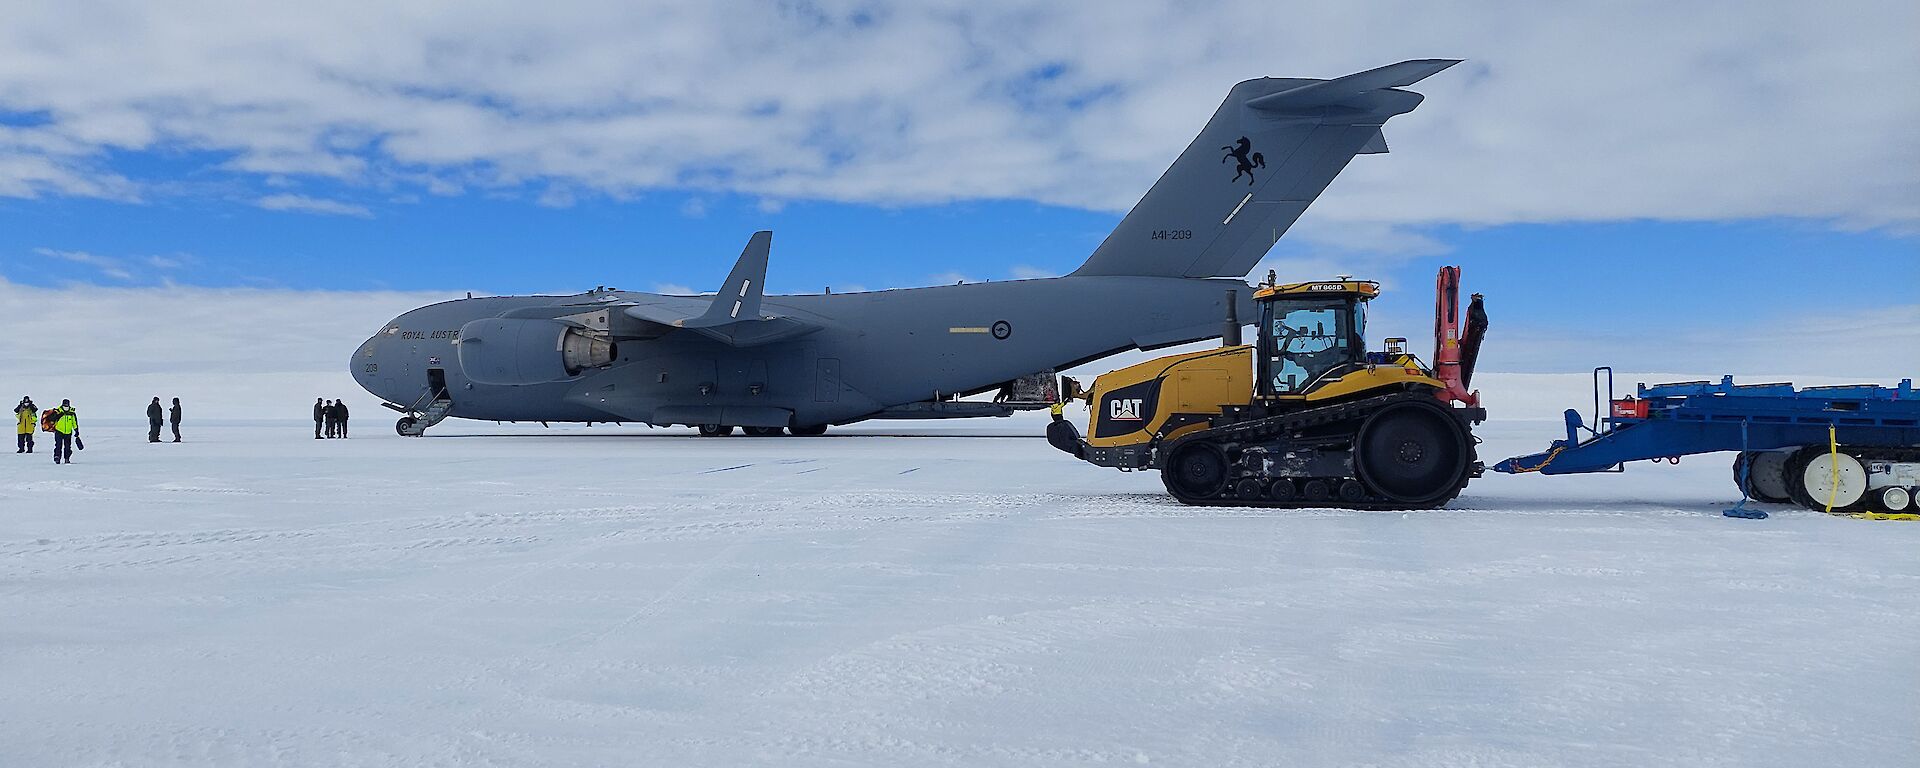 A Boeing C-17 Globemaster parked on ice with a refuelling tractor in the foreground